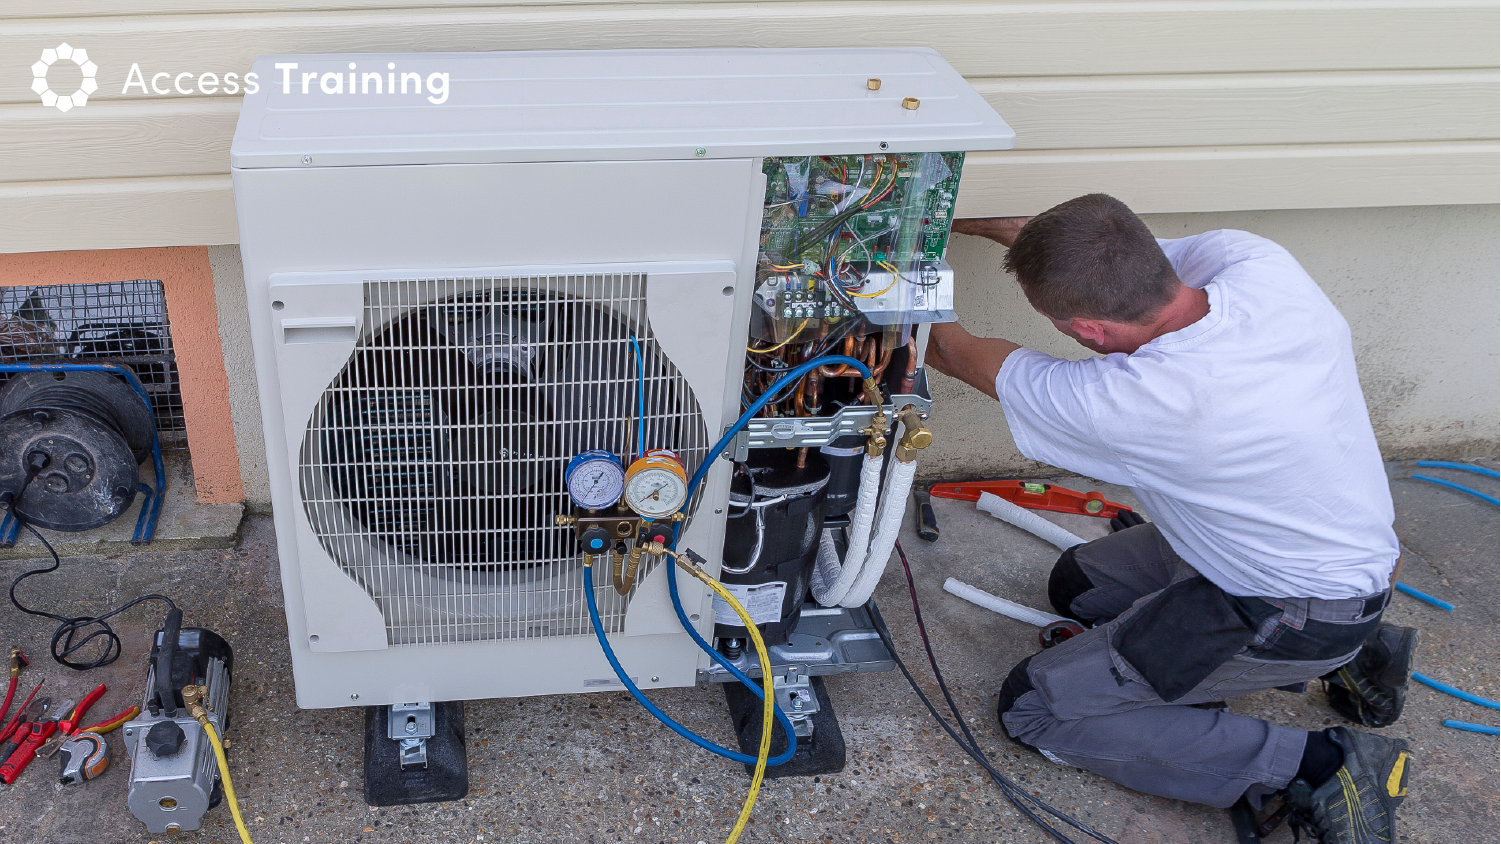 How Can I Learn to Install a Heat Pump?